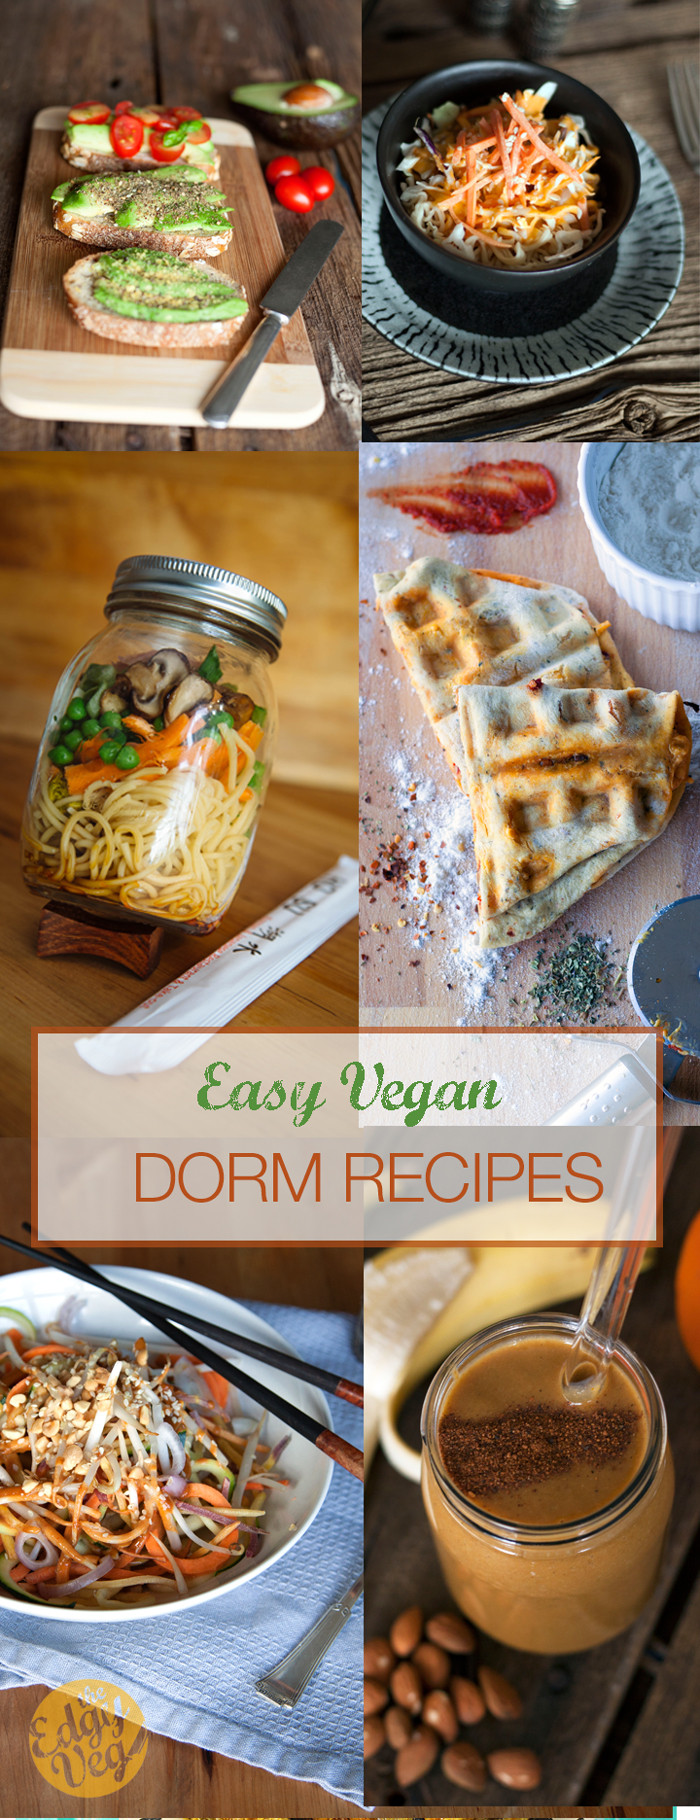 Easy Vegetarian Recipes For College Students
 Easy Vegan College Dorm Recipes